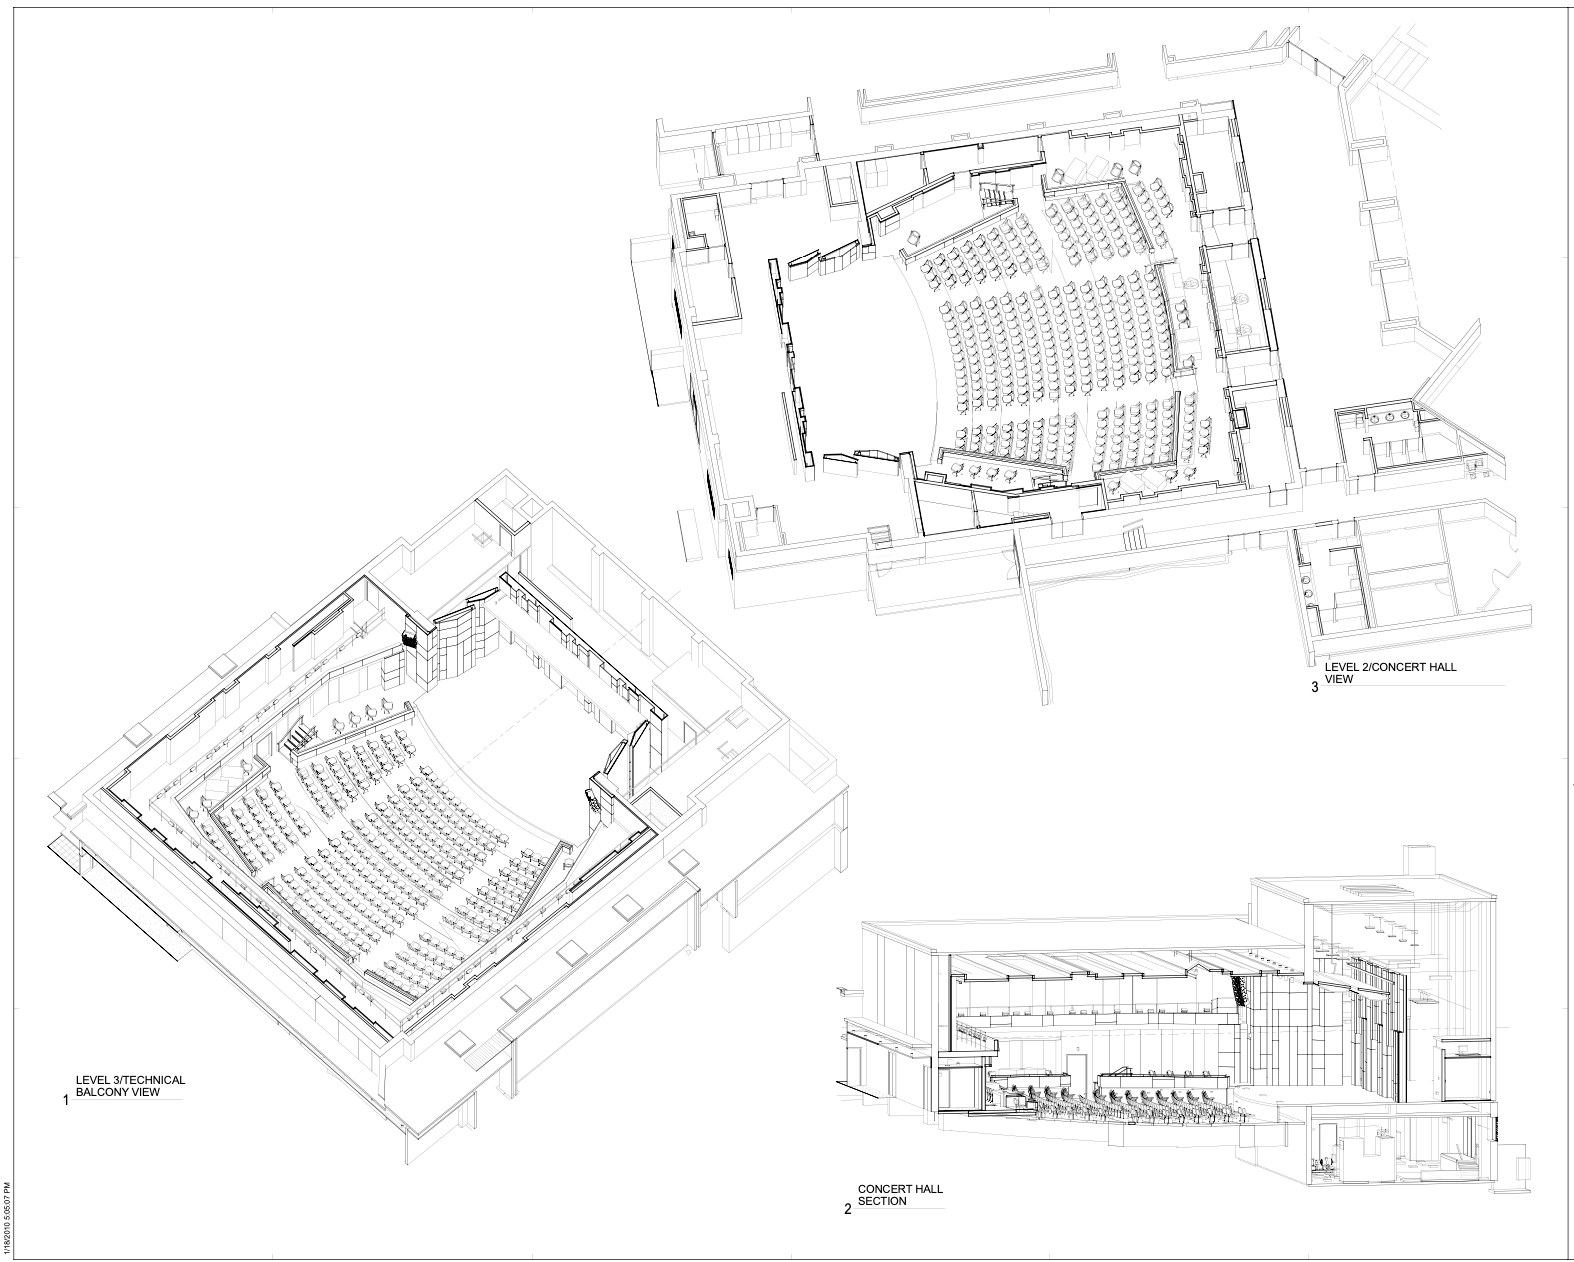 Design drawings for halls.